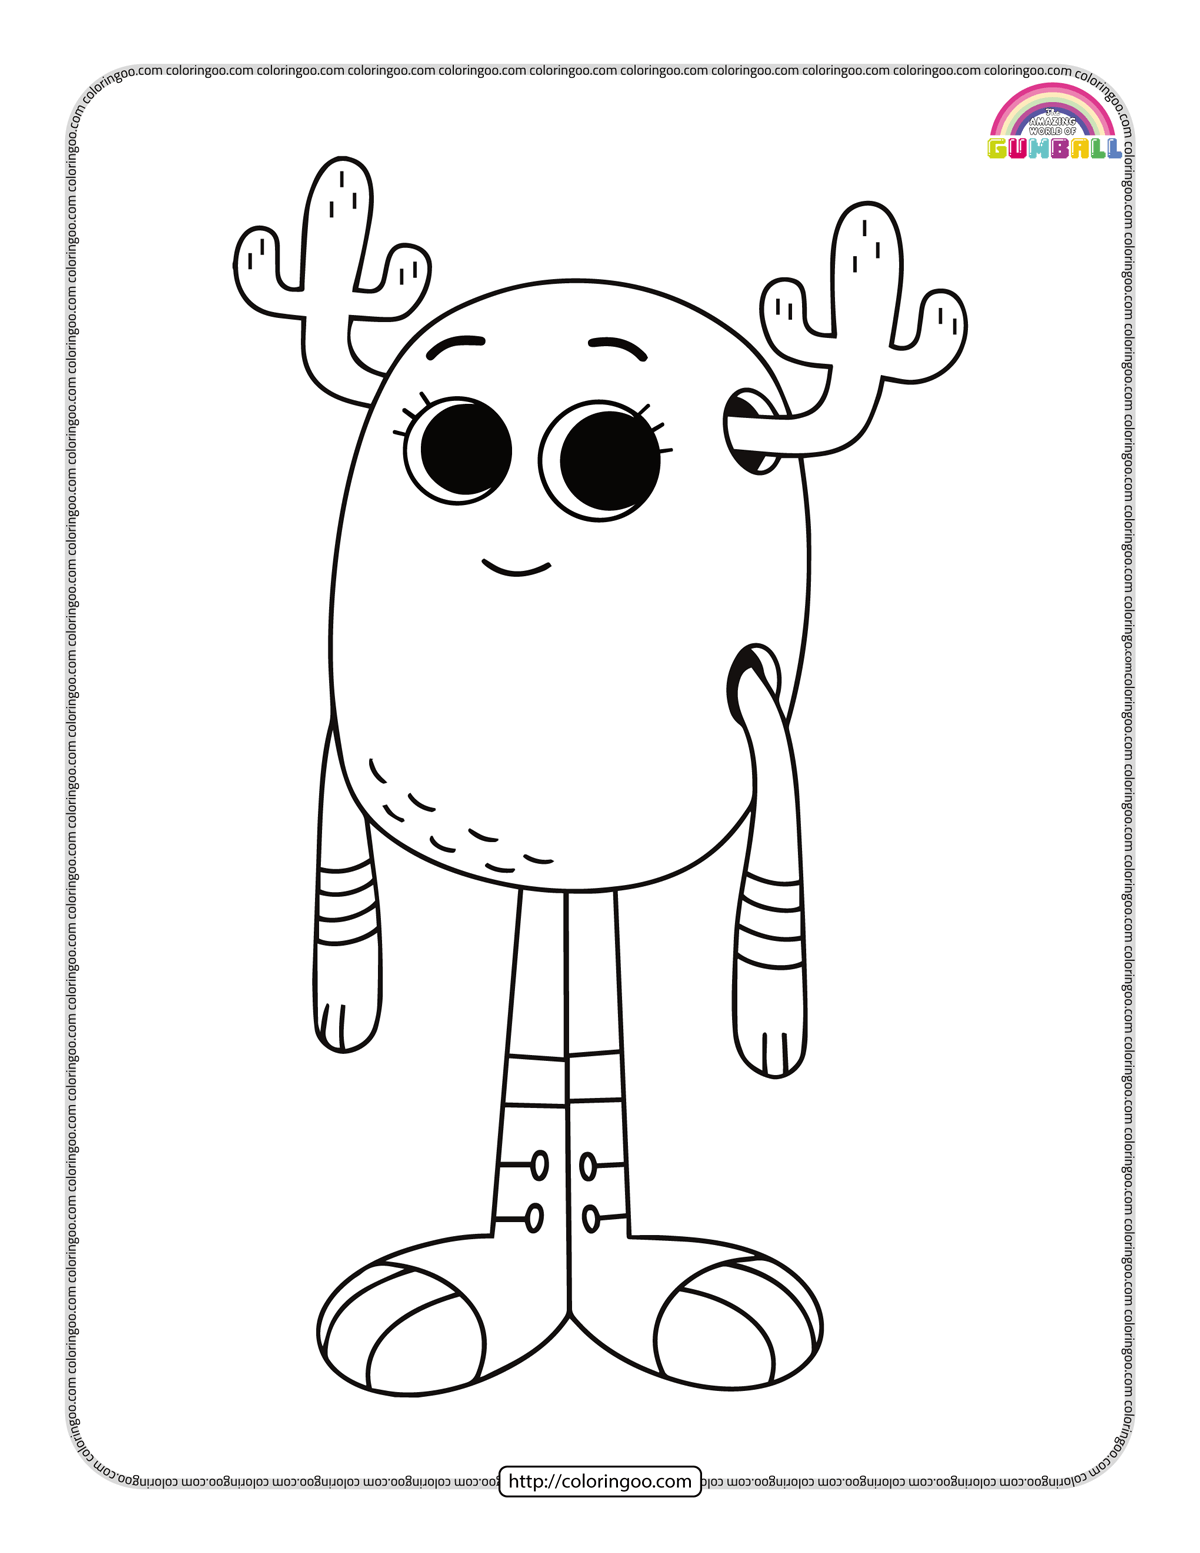 gumball penny fitzgerald pdf coloring pages